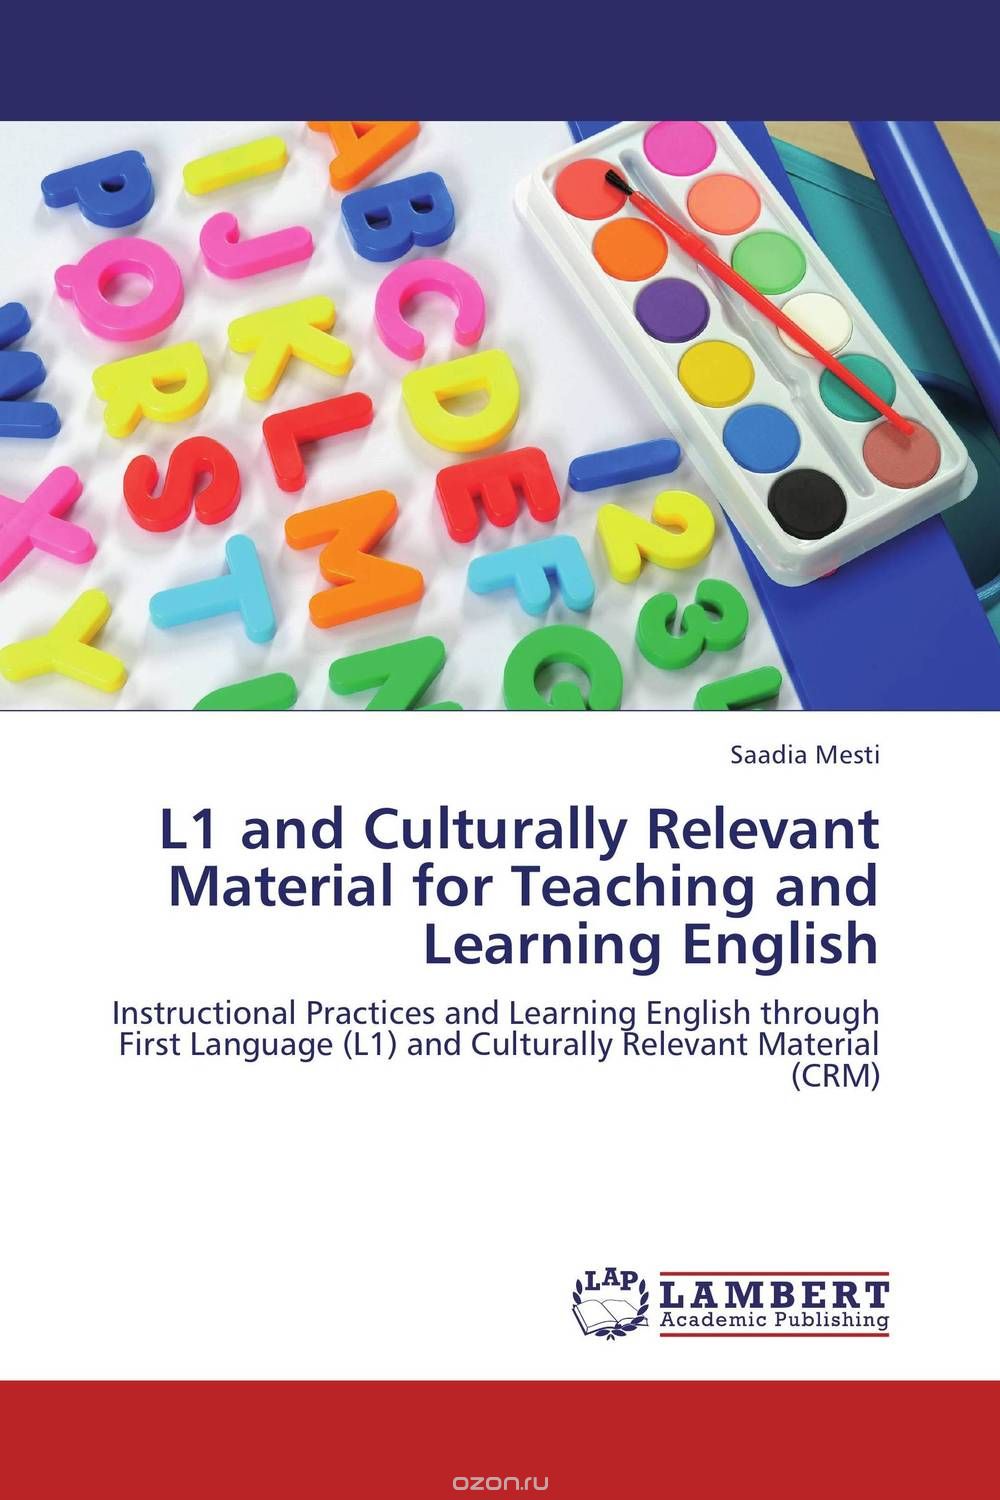 Скачать книгу "L1 and Culturally Relevant Material for Teaching and Learning English"